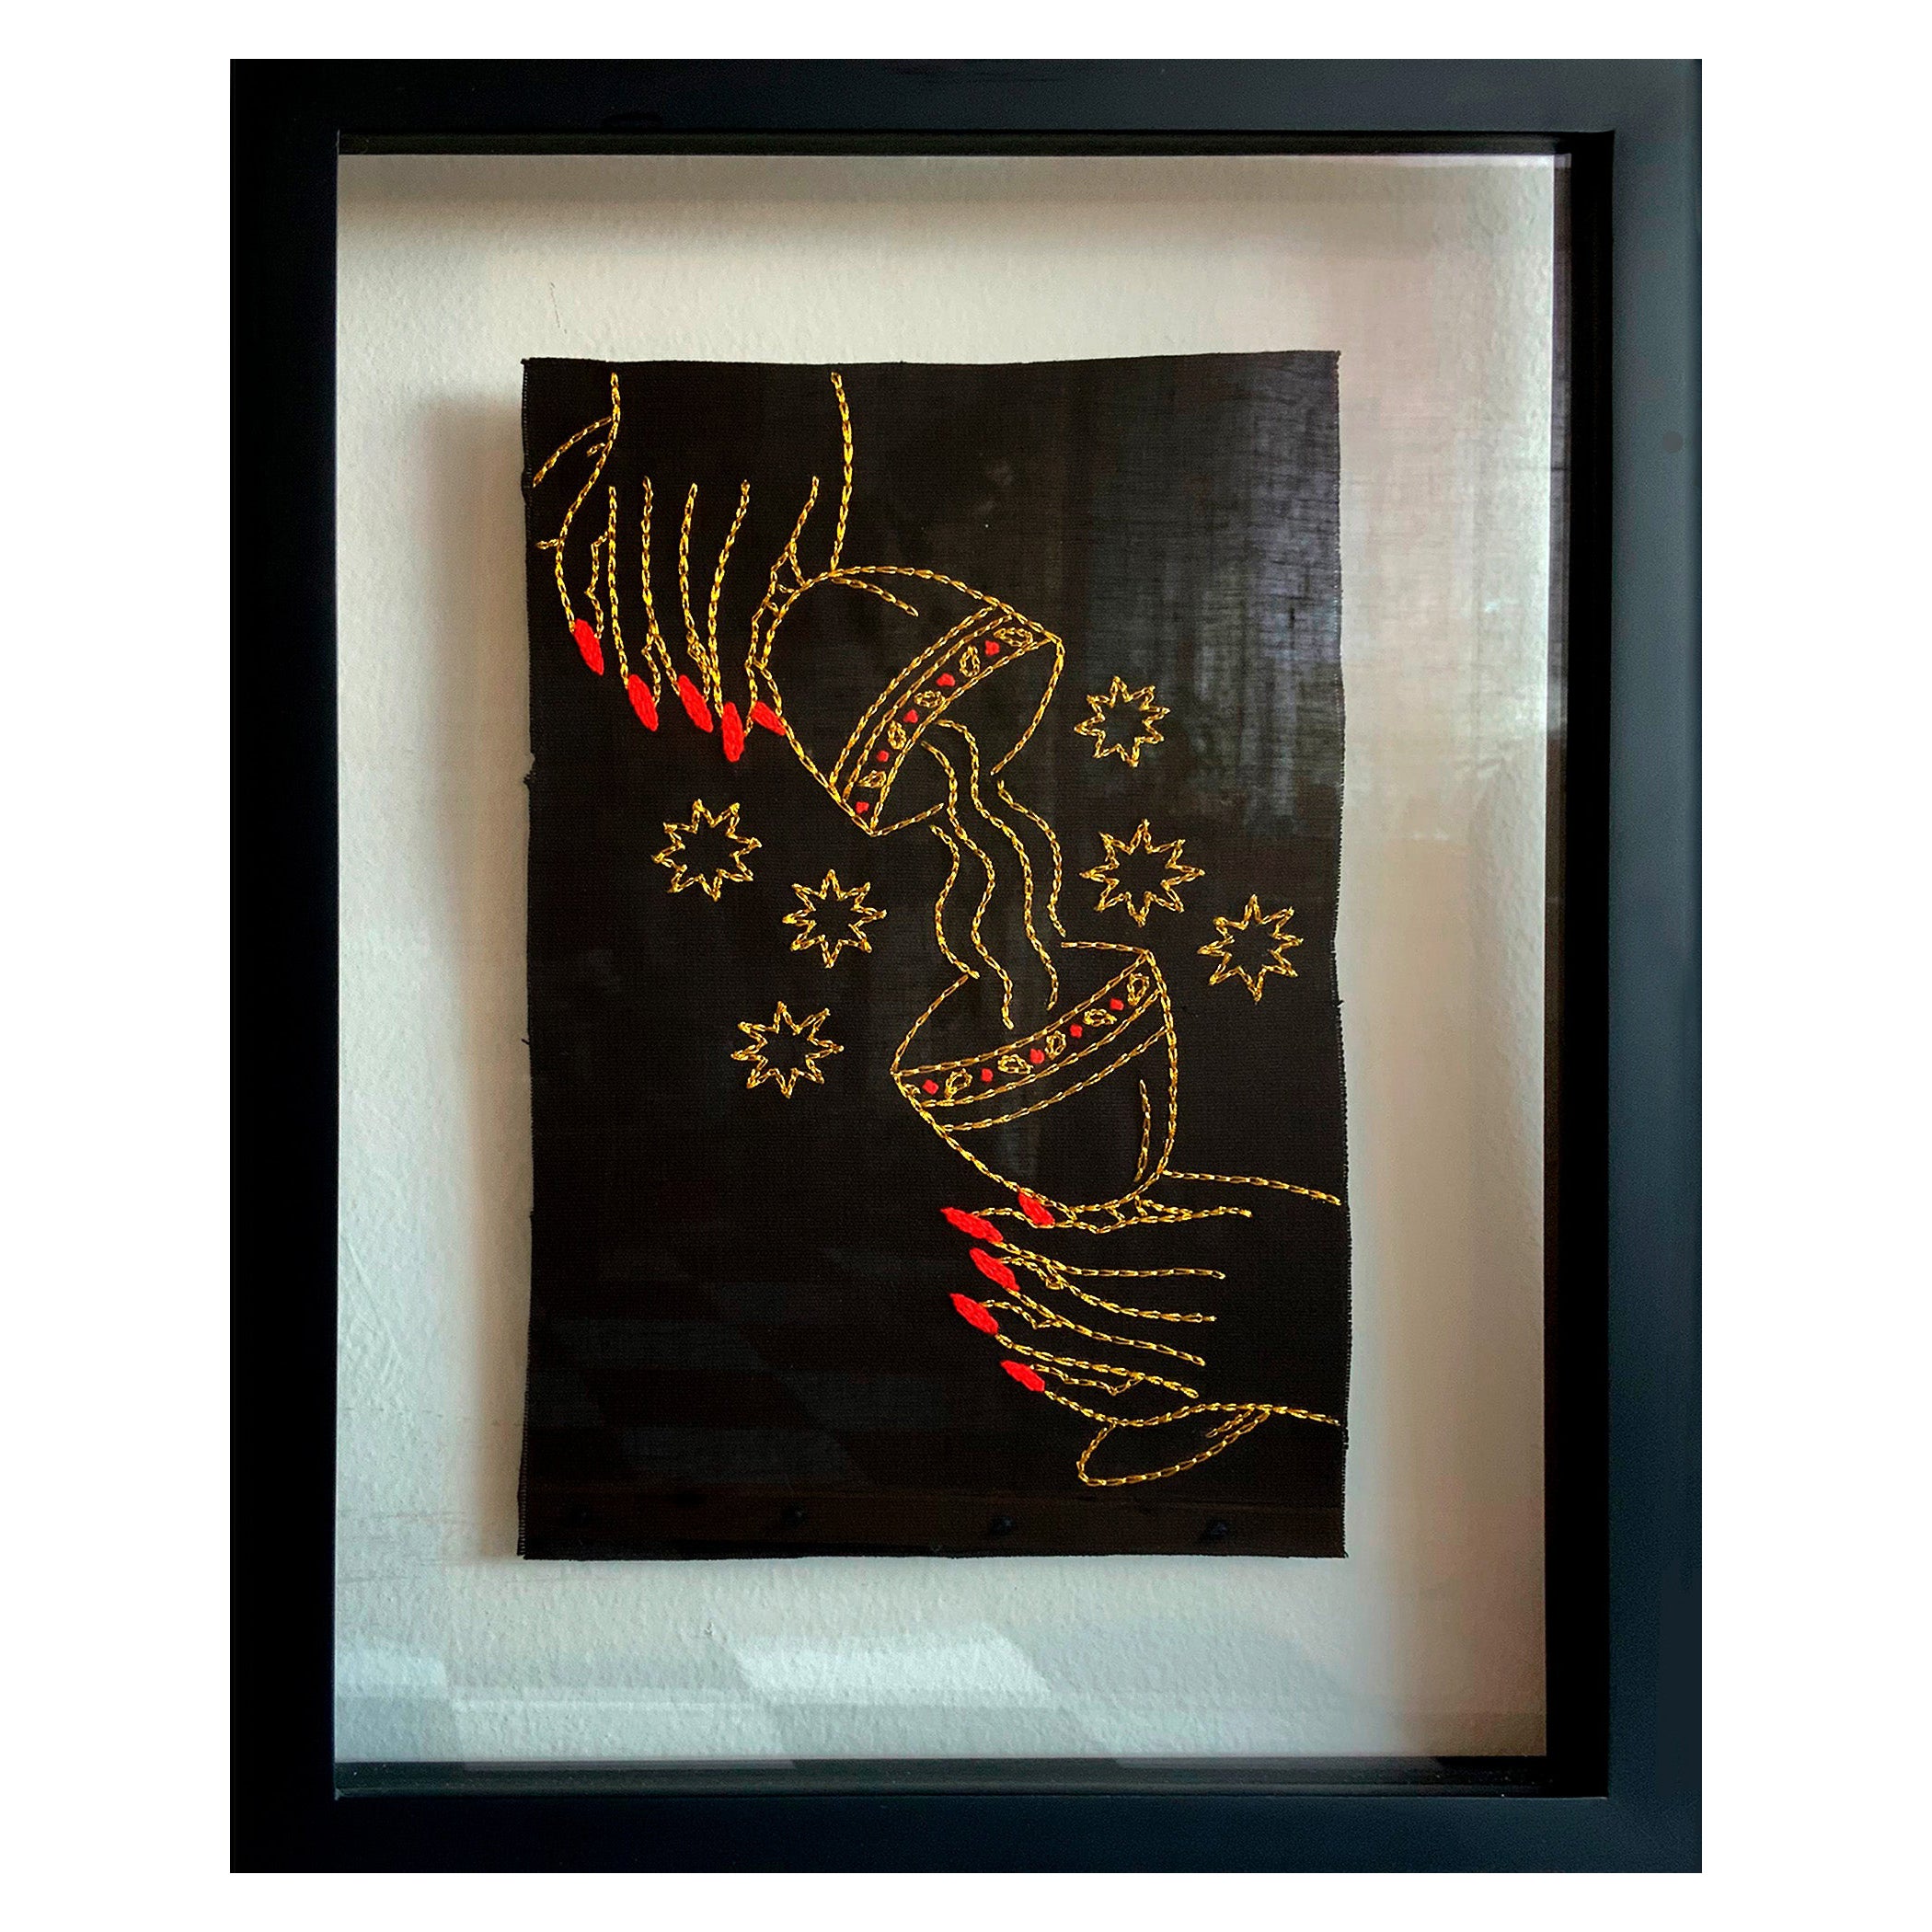 La Templanza. From The Ventura Series.  Embroidery thread on canvas. Framed